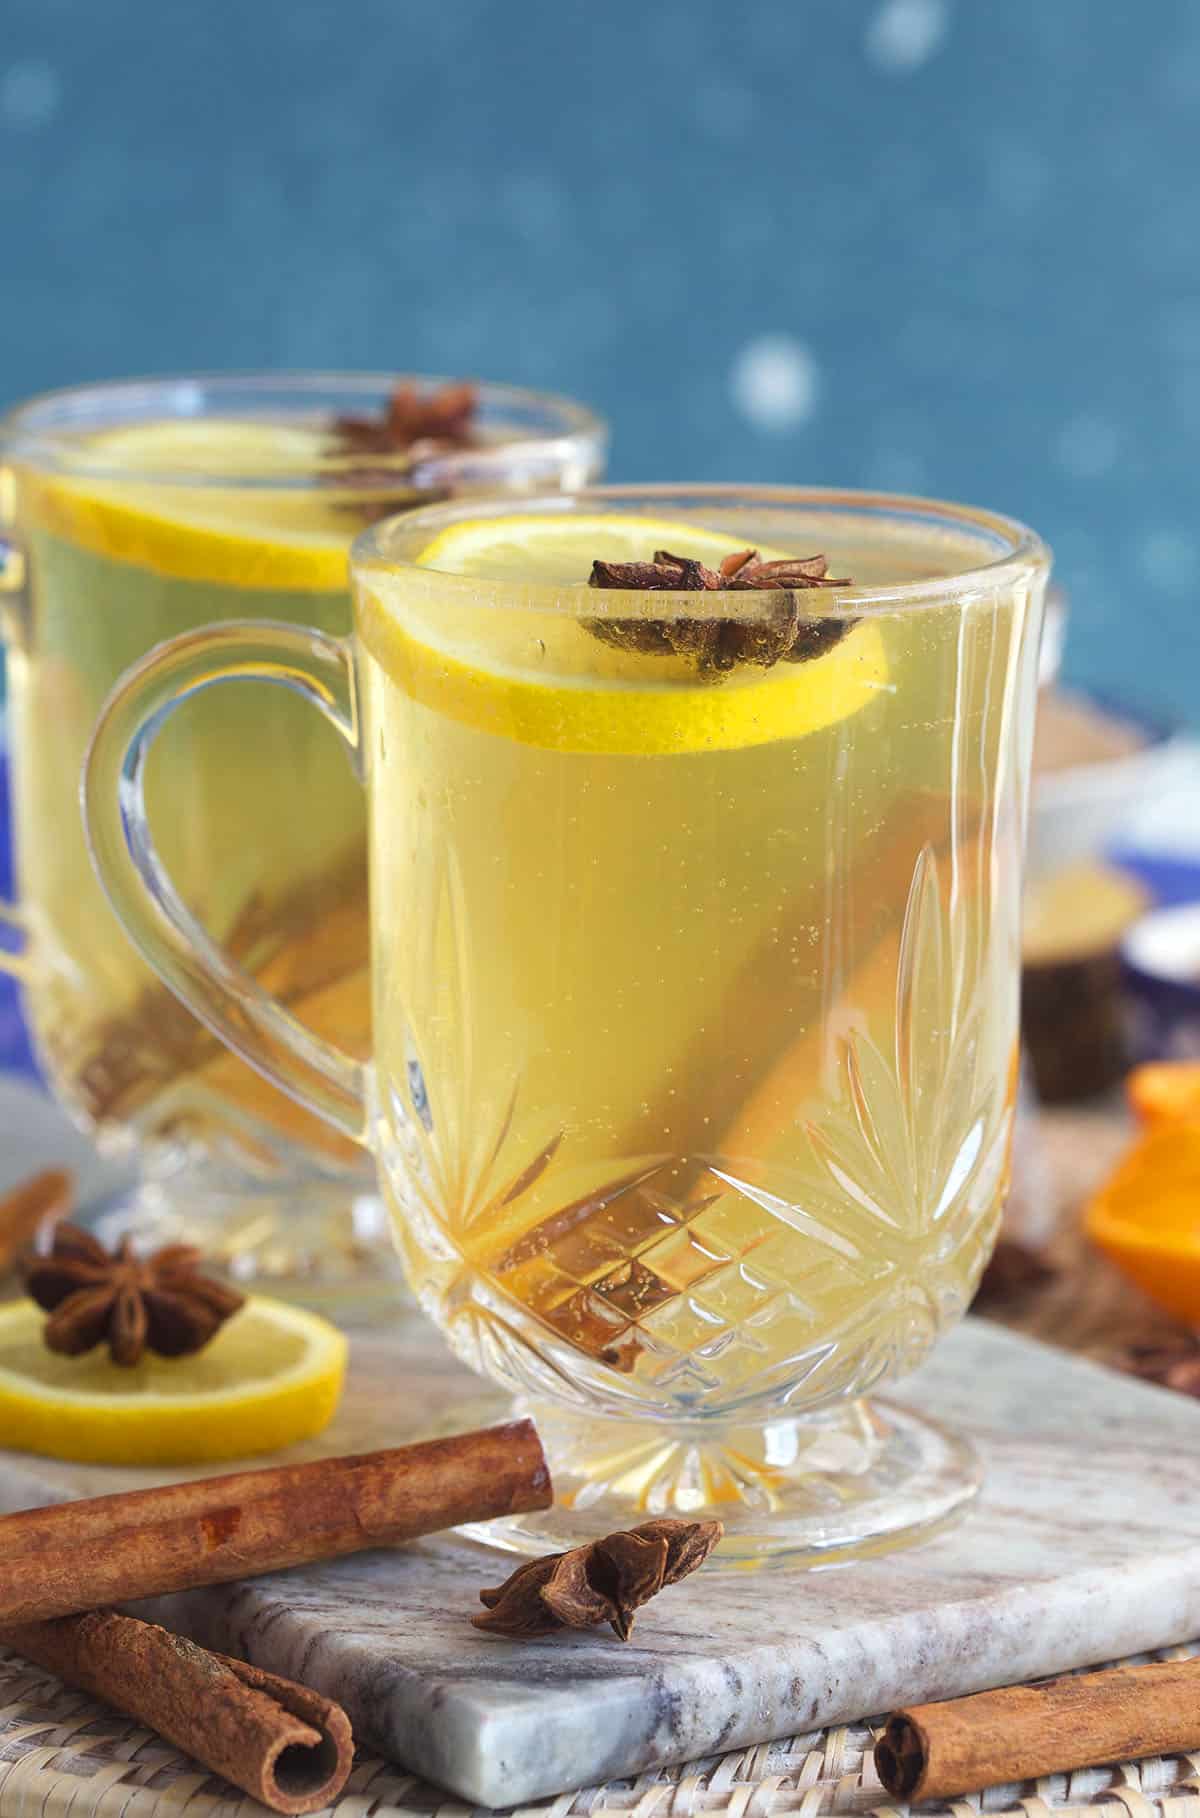 Lemon slices, star anise and cinnamon sticks are placed in a mug of hot toddy. 